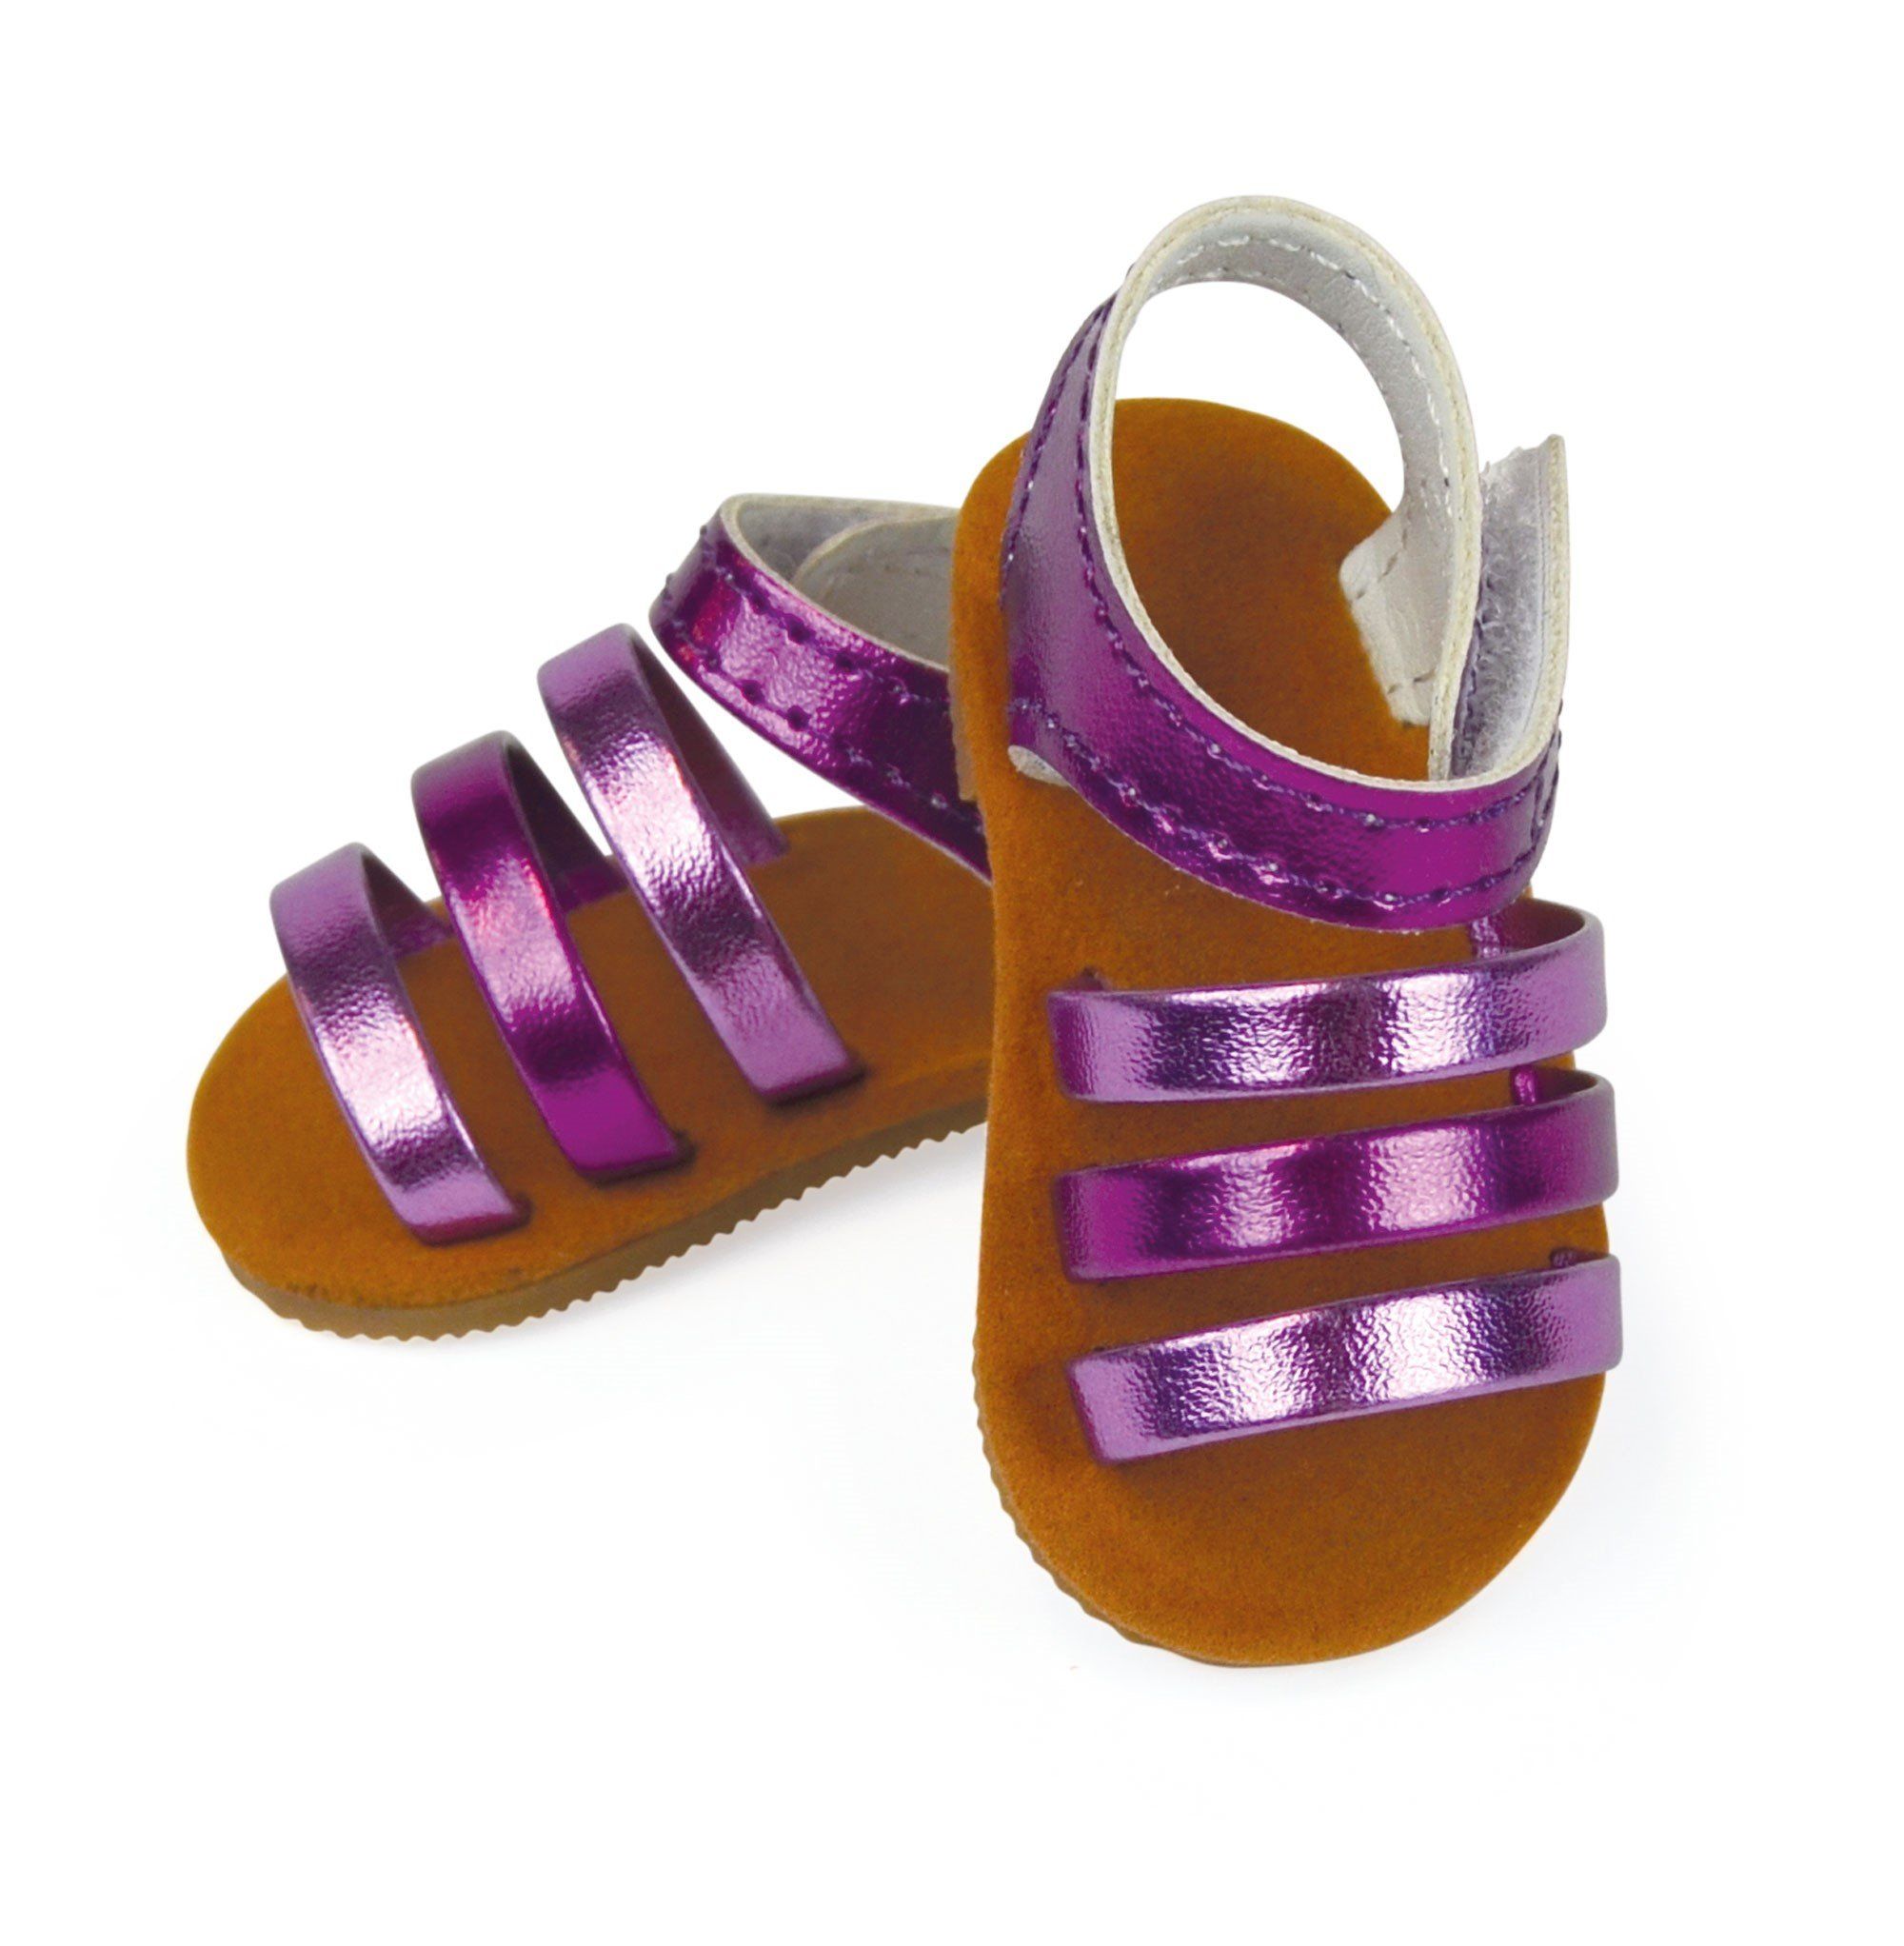 Strappy shiny two-tone purple sandals for 18" dolls. 